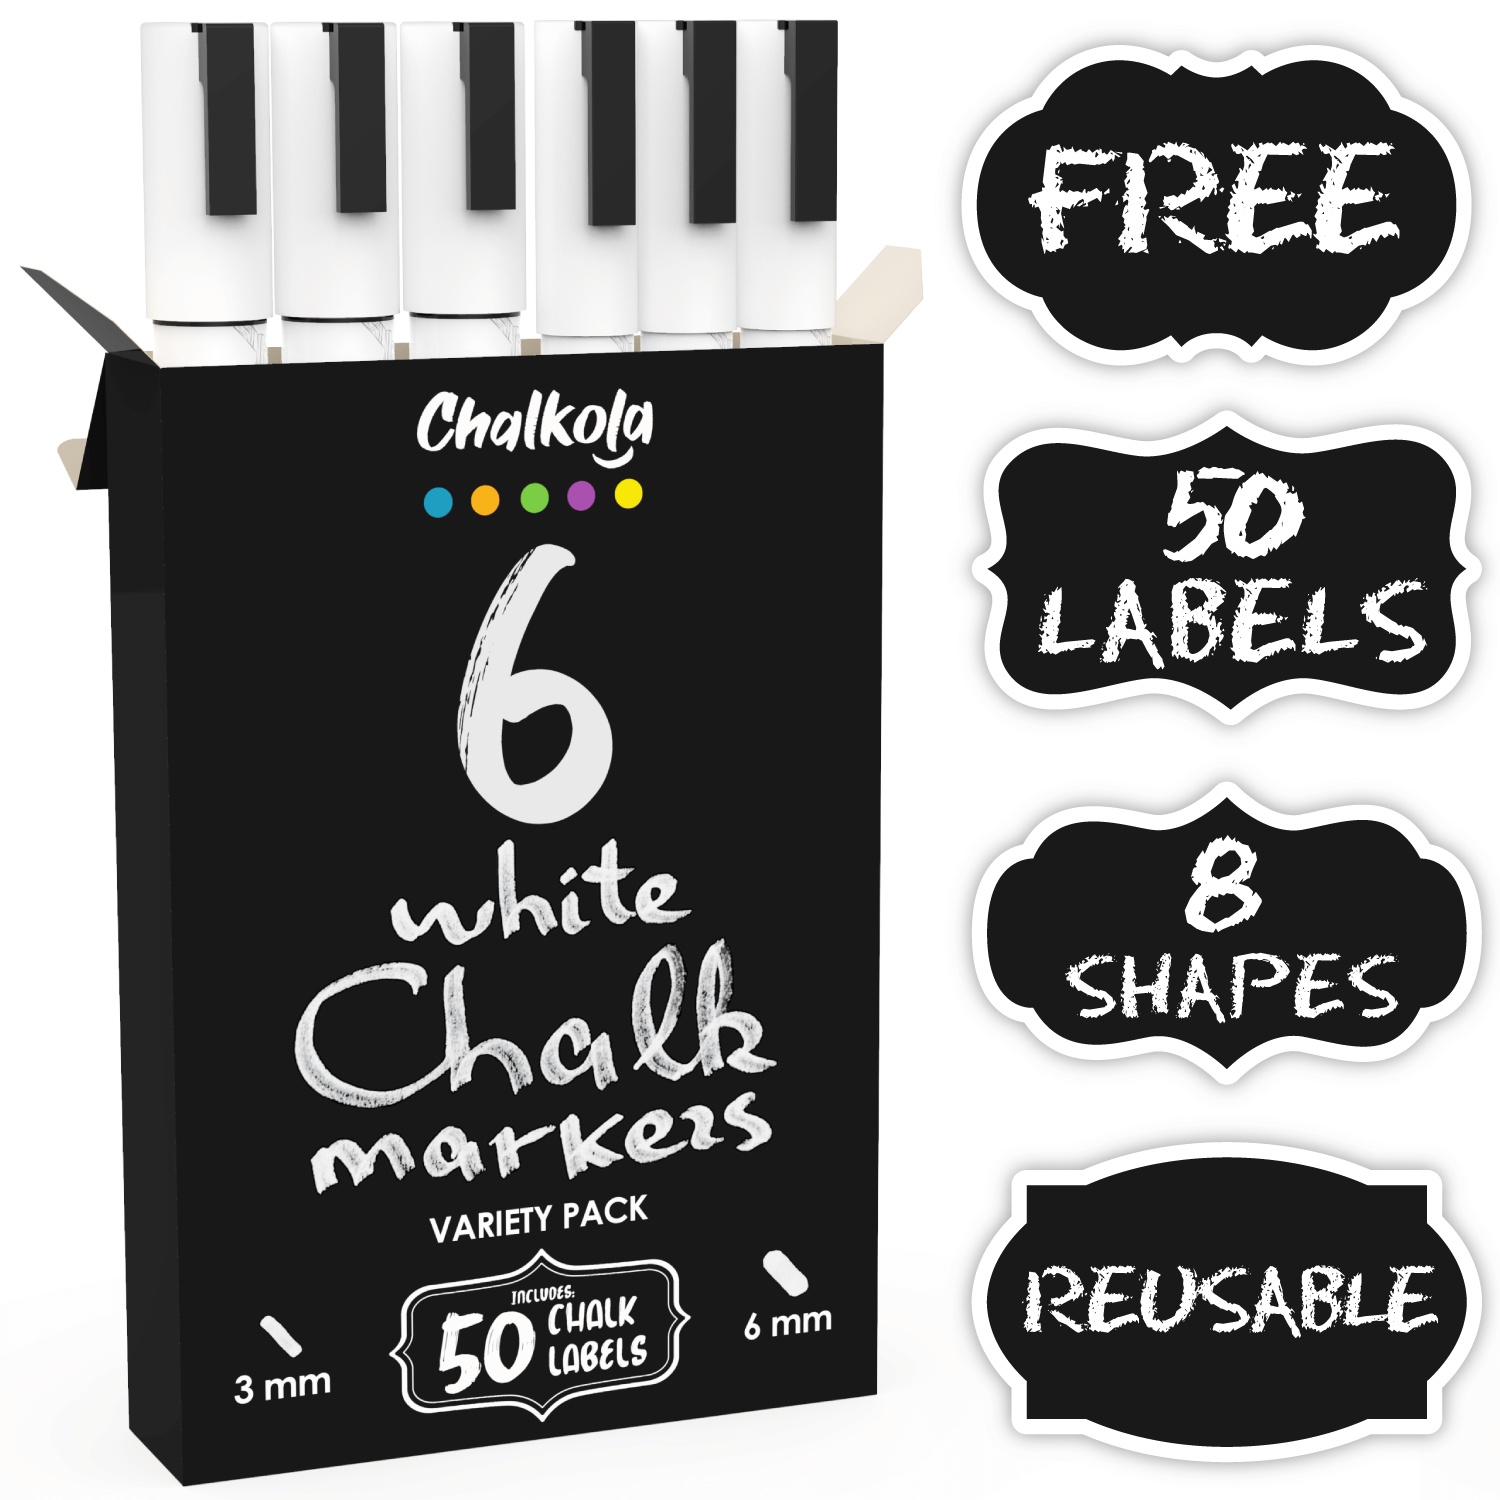 White Chalk Pens - Variety Pack of 6 | Fine and Bold Tip